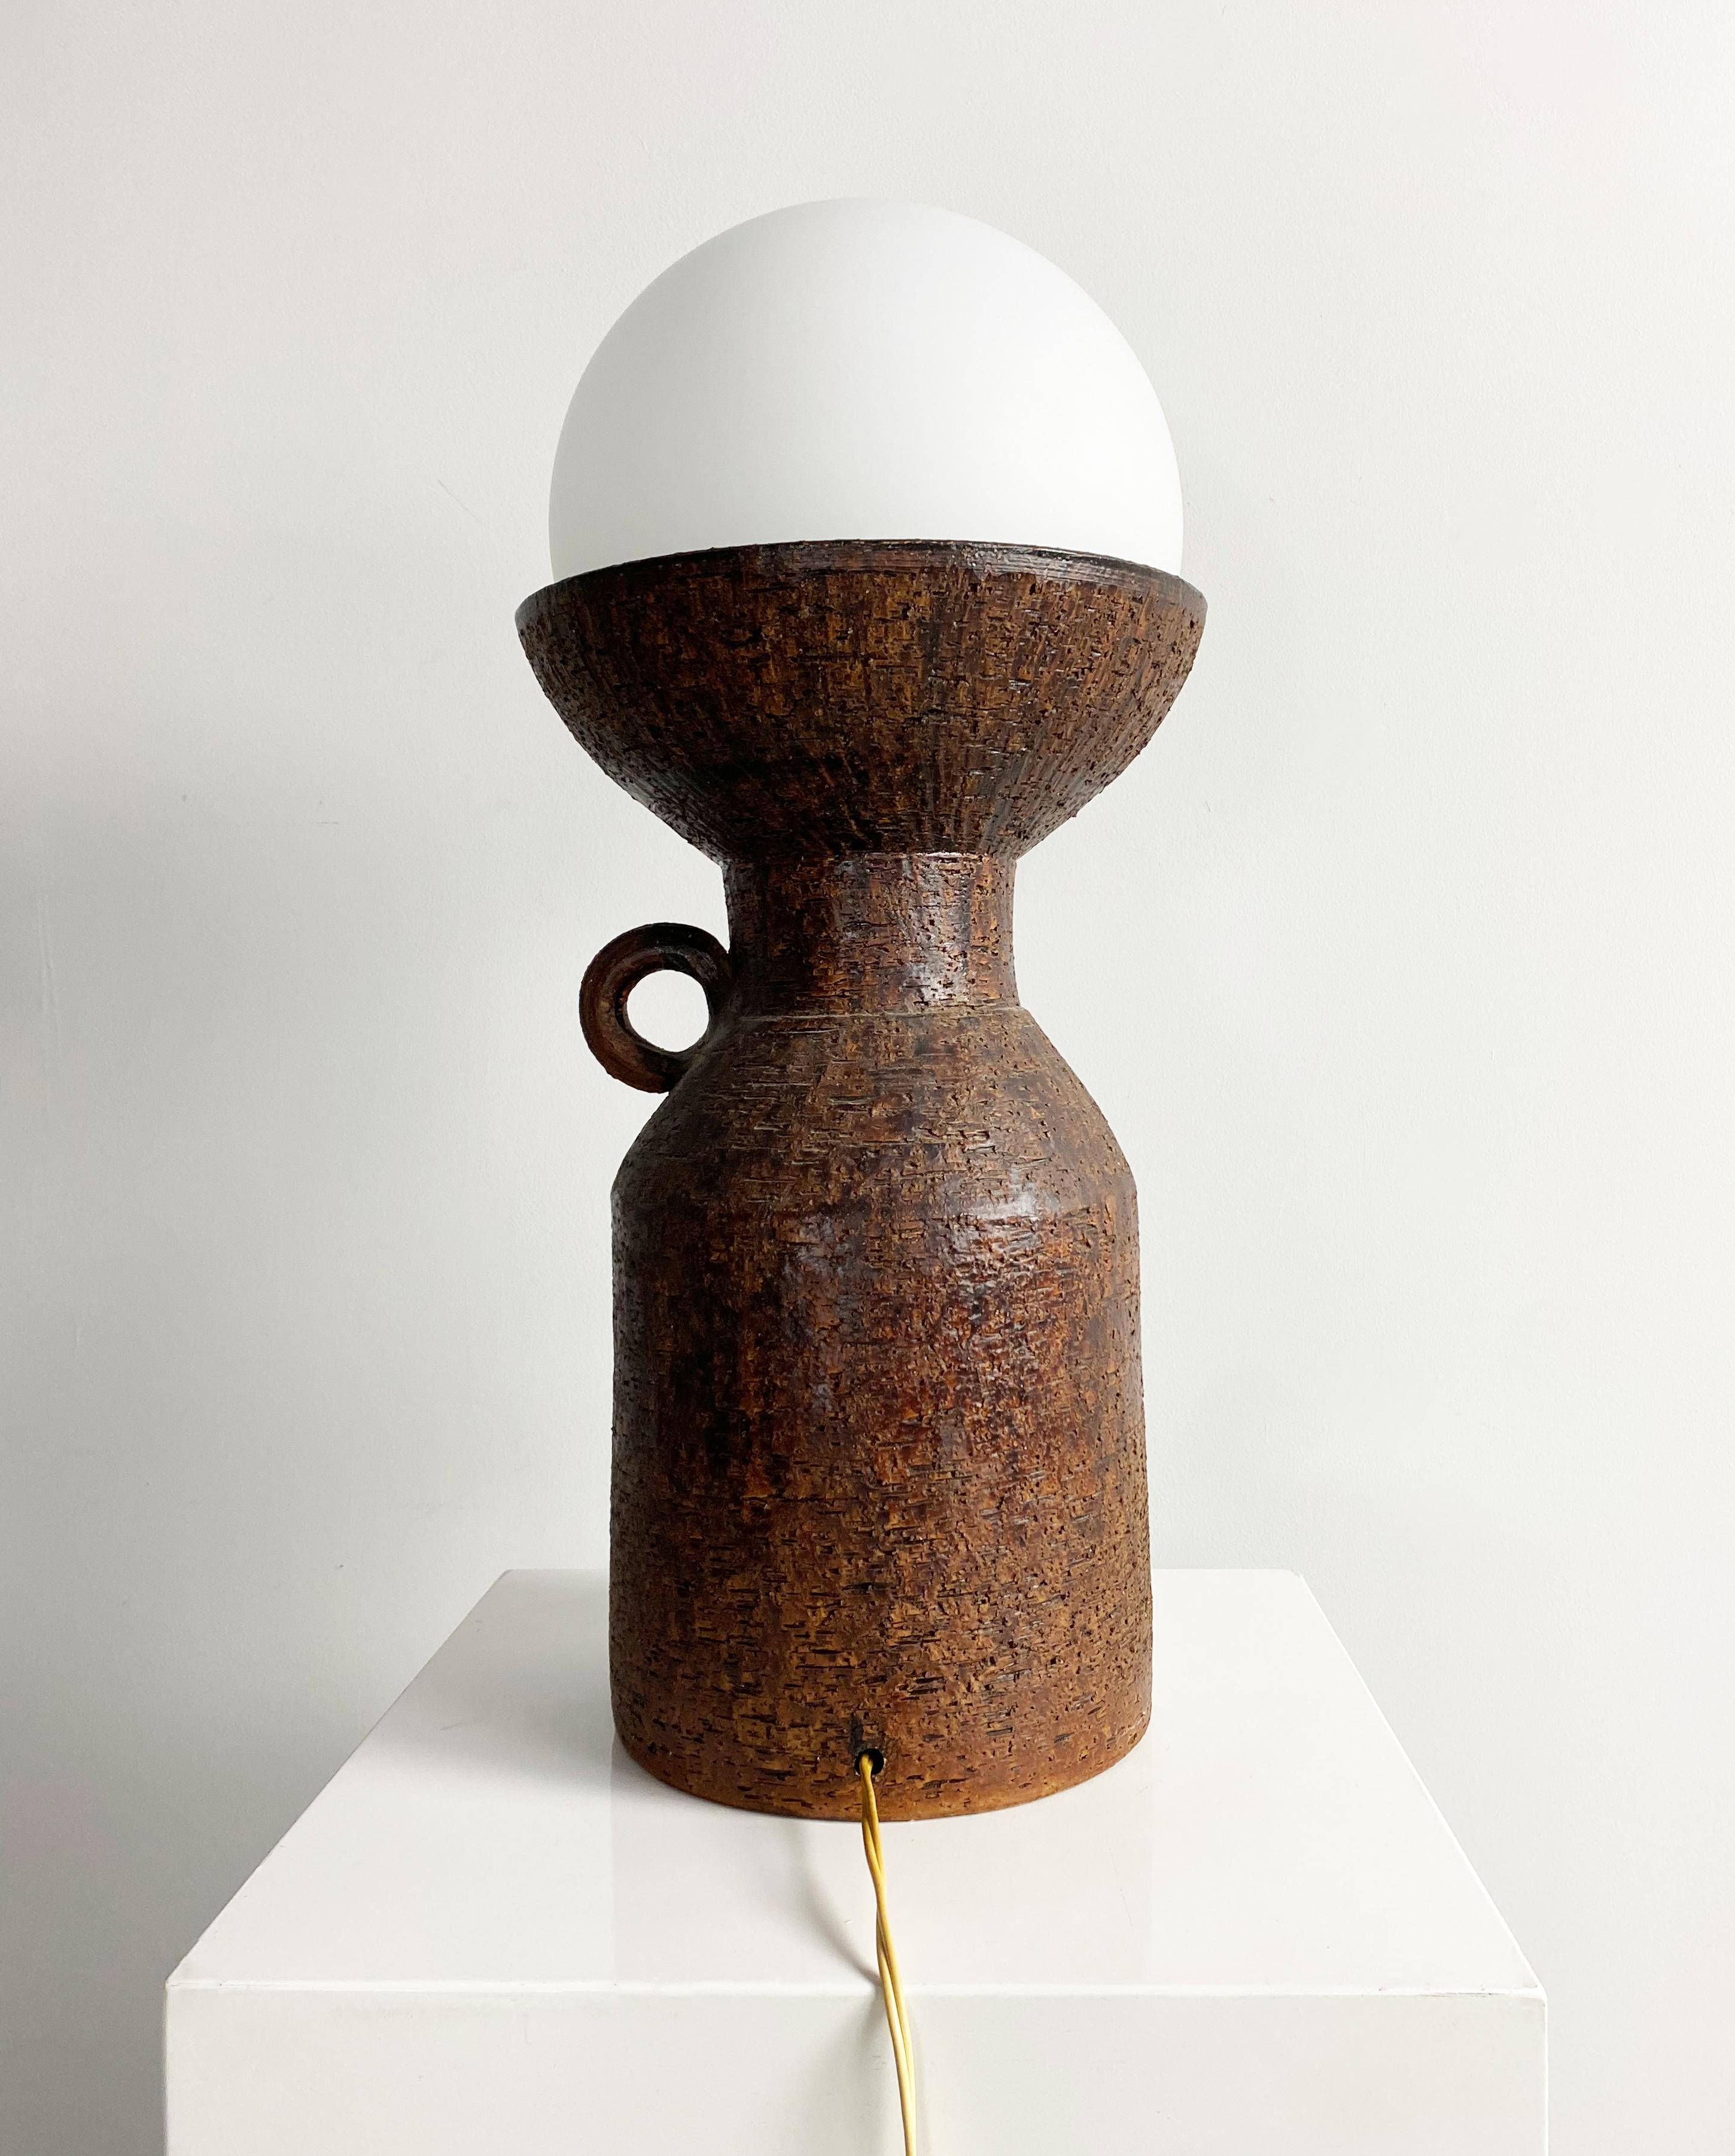 Large Brutalist Ceramic Lamp, Germany, c.1970 In Good Condition For Sale In Surbiton, GB